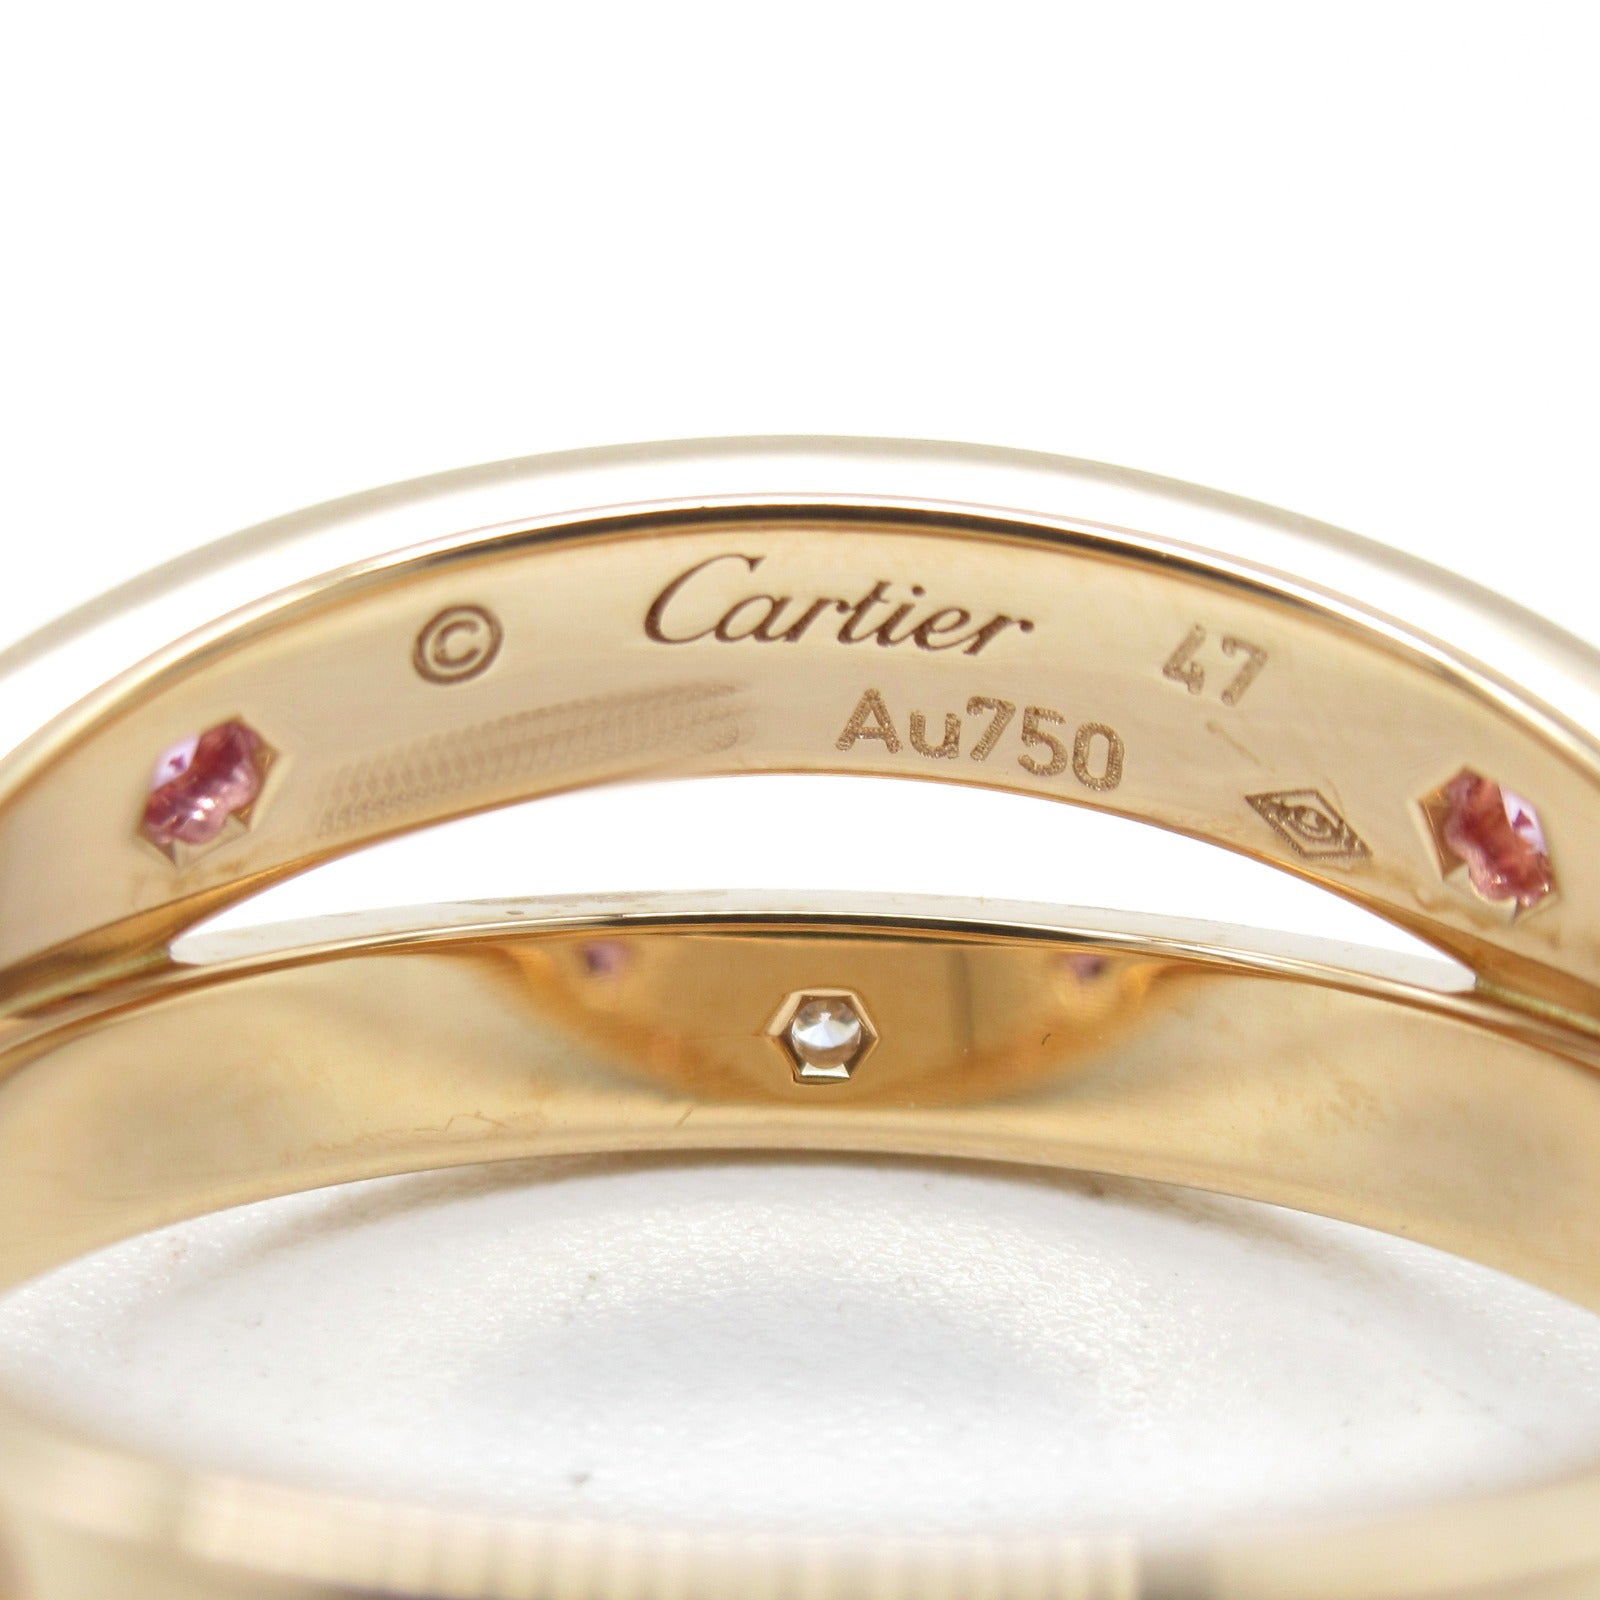 Cartier Cartier Rose Sapphire Ring Ring Ring Jewelry K18PG (Pink G) Rose Sapphire  Pink Ring